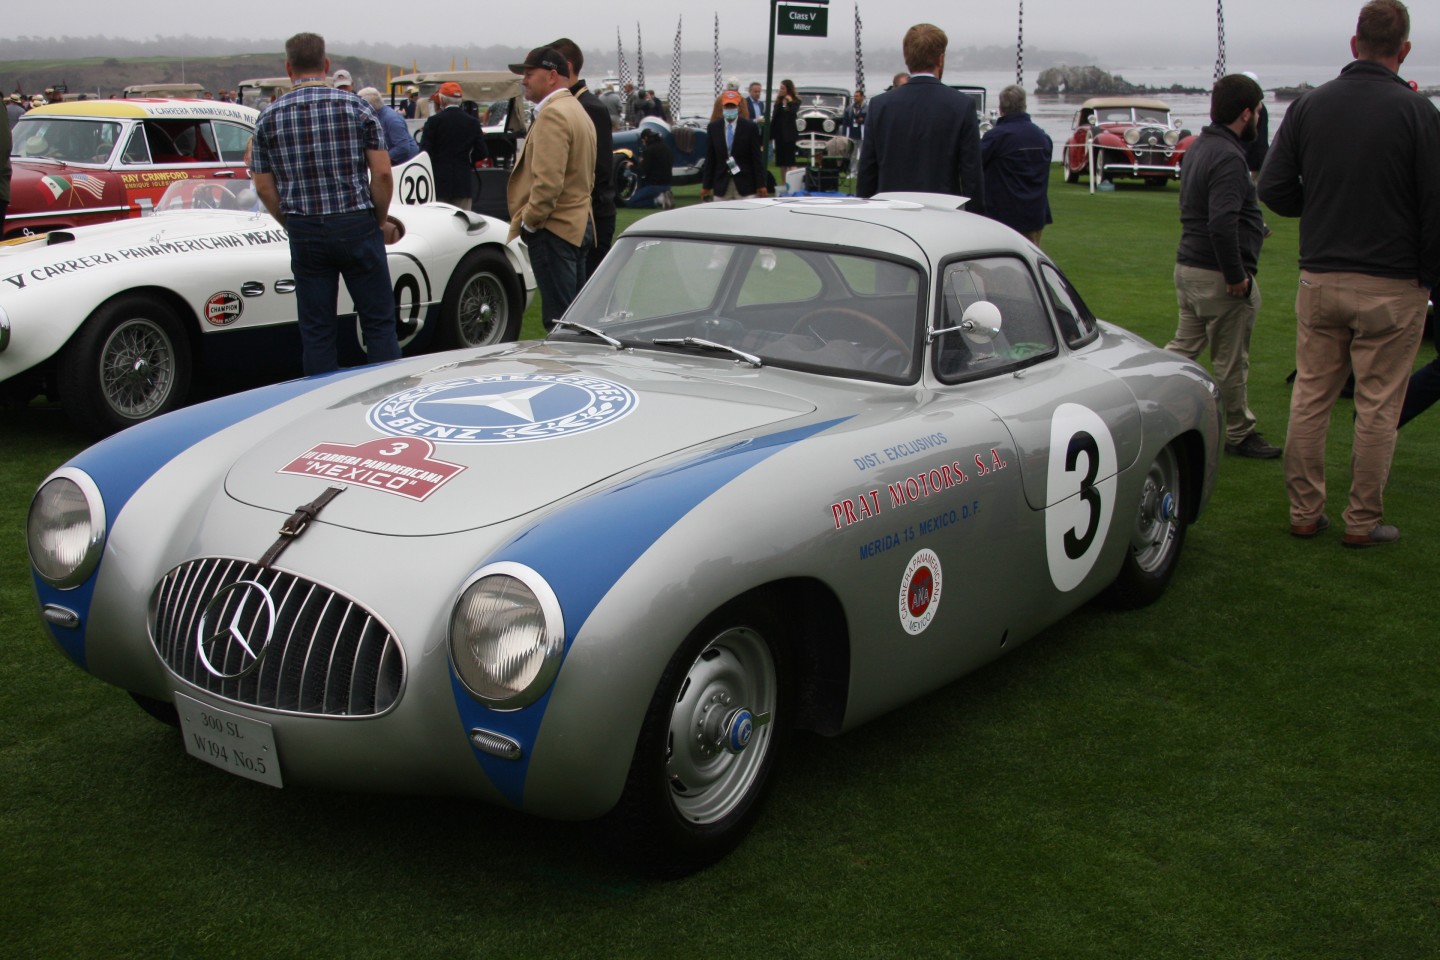 This 1952 Mercedes-Benz W194 300 SL Race Car was exhibited in the La Carrera Panamericana Class by the Mercedes-Benz Museum of Stuttgart, Germany. It was in this very car that Rudolf Caracciola took fourth place in the 1952 Mille Miglia and Hermann Lang finished second in the 1952 Carrera Panamericana with an average speed of over 100 mph. Mercedes-Benz sent a highly organized team of drivers, mechanics, and 300 SLs and finished 1-2 with Kling in another 300 SL taking the win.